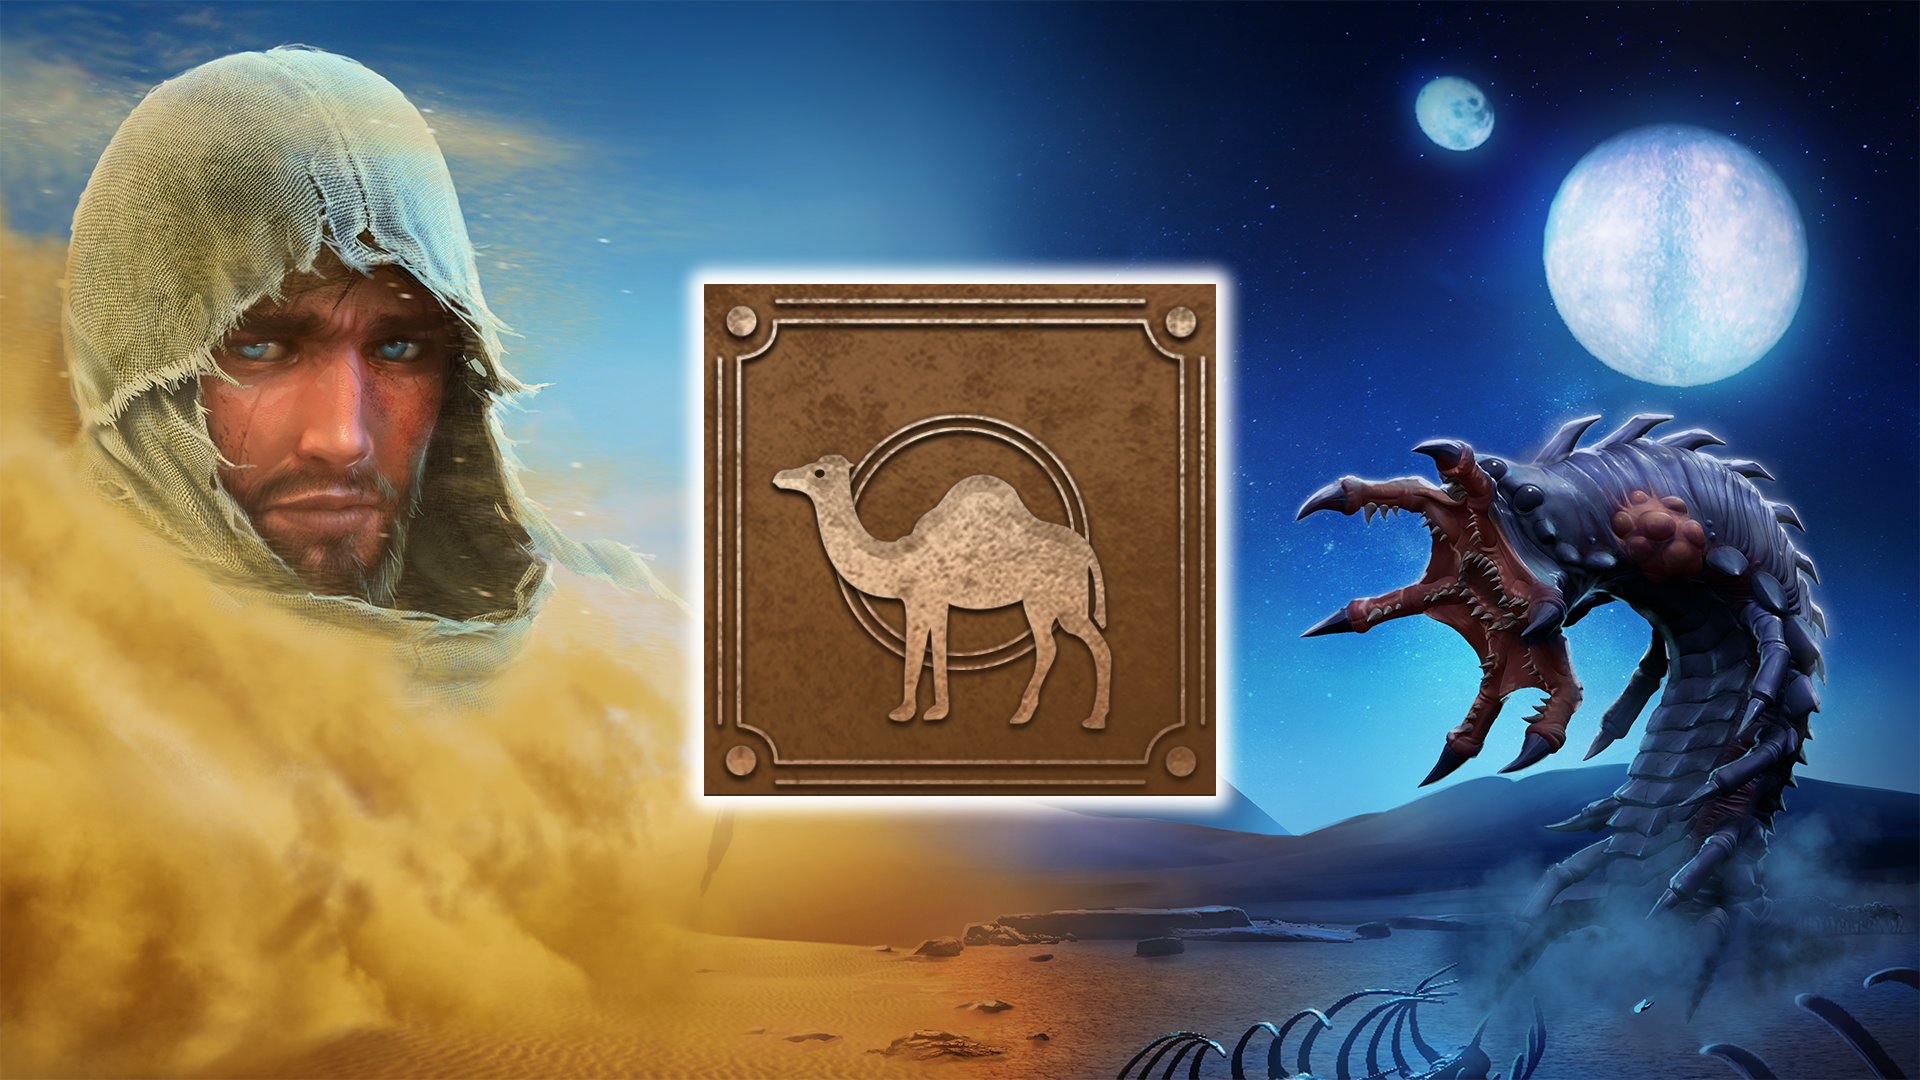 Icon for Ranger of the sand